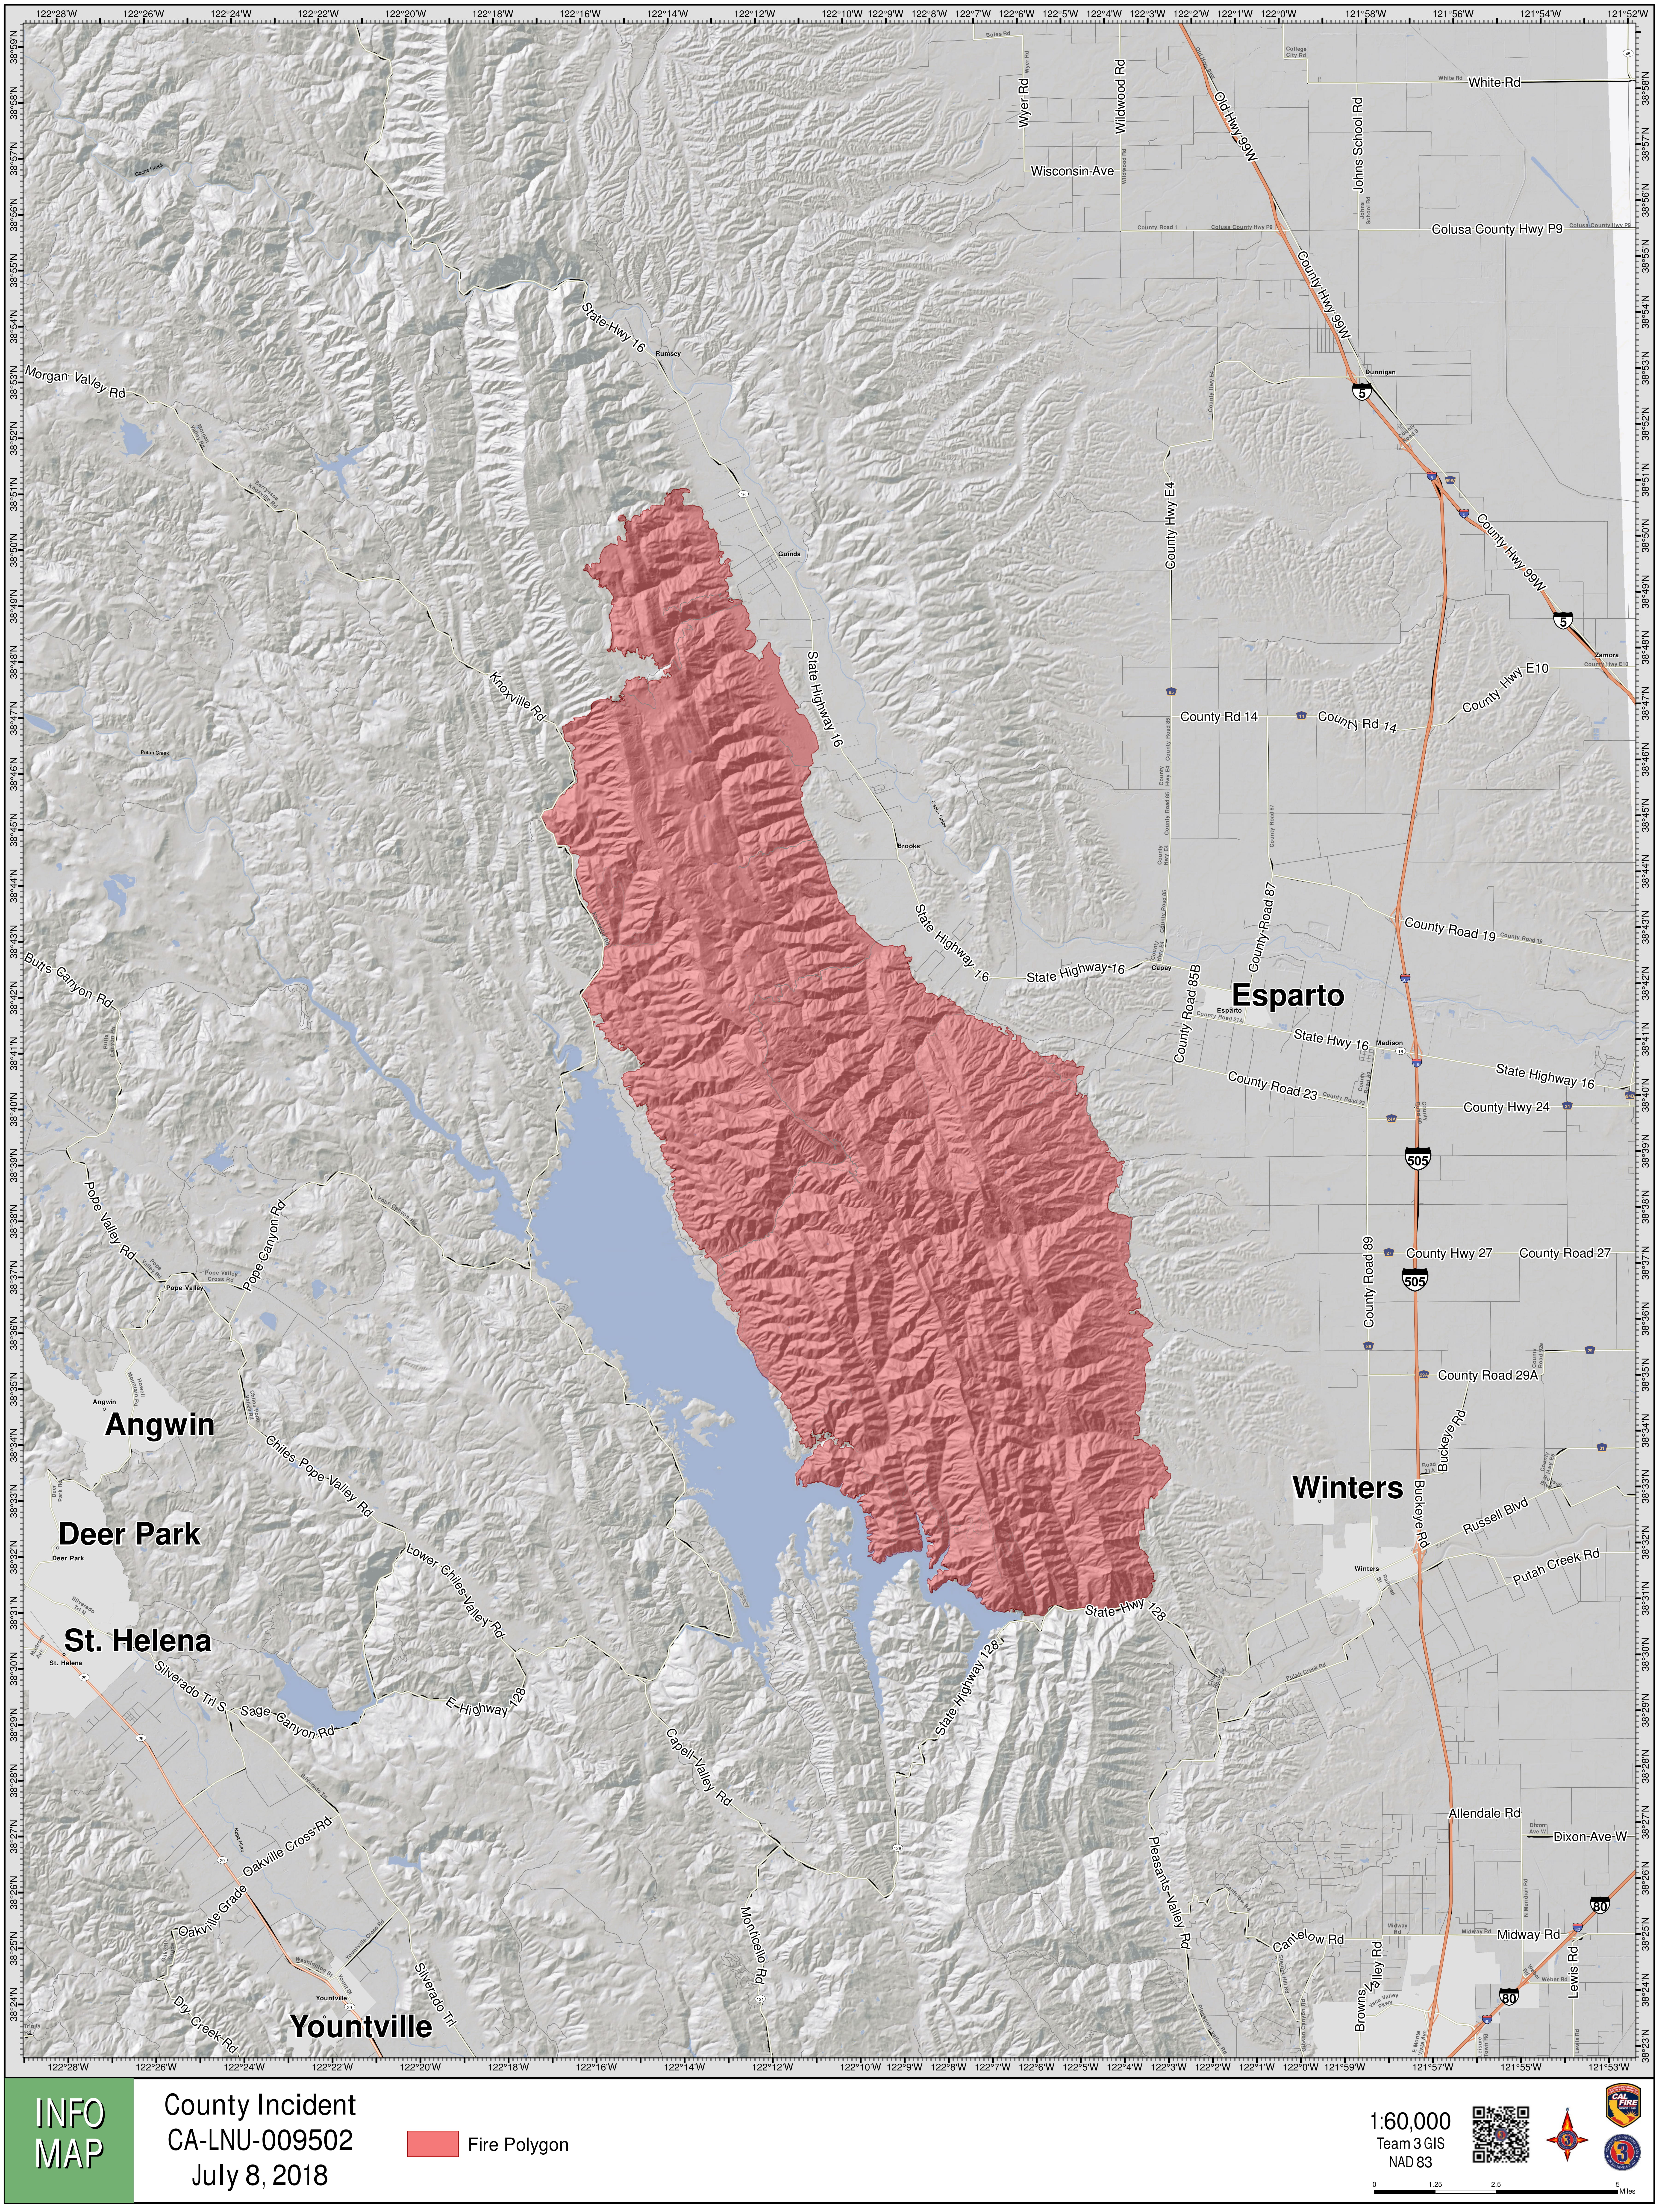 Maps A Look At The County Fire Burning In Yolo Napa Counties